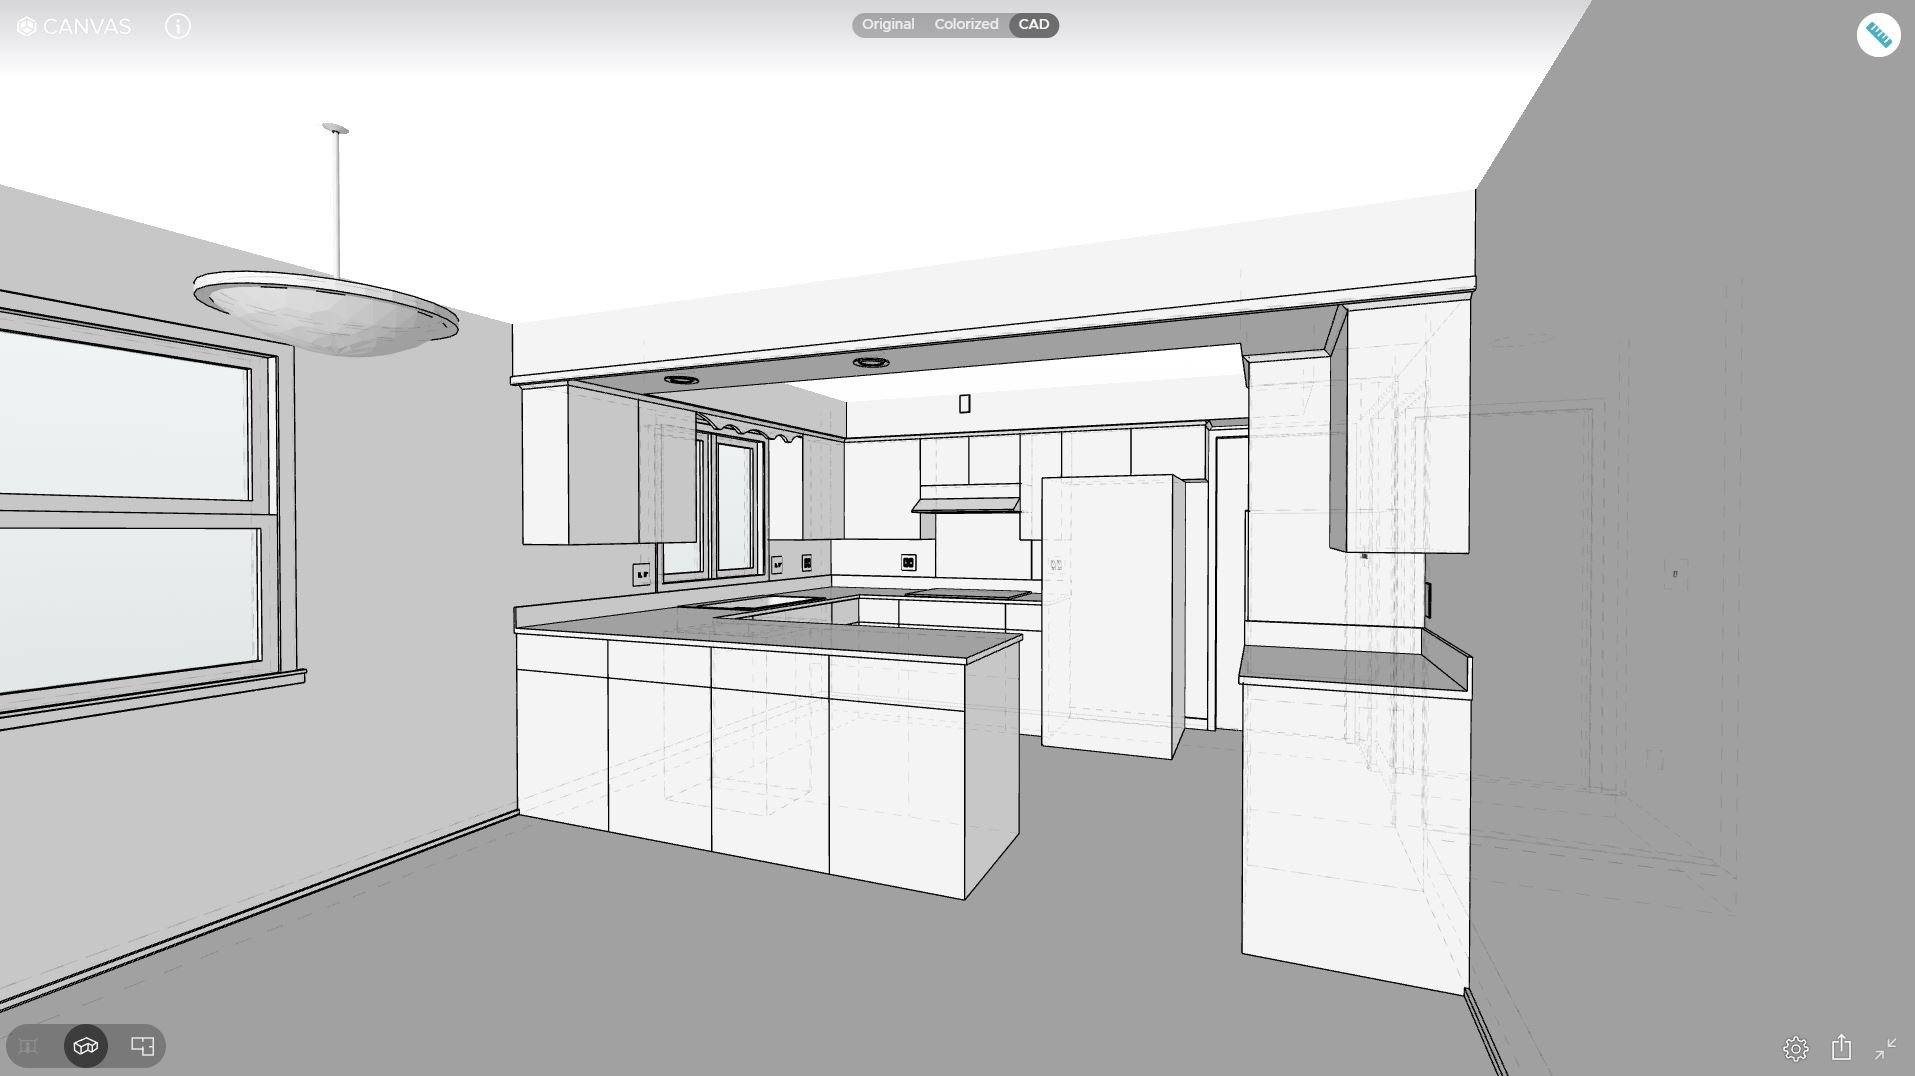 Peters-existing-kitchen-perspective1.JPG